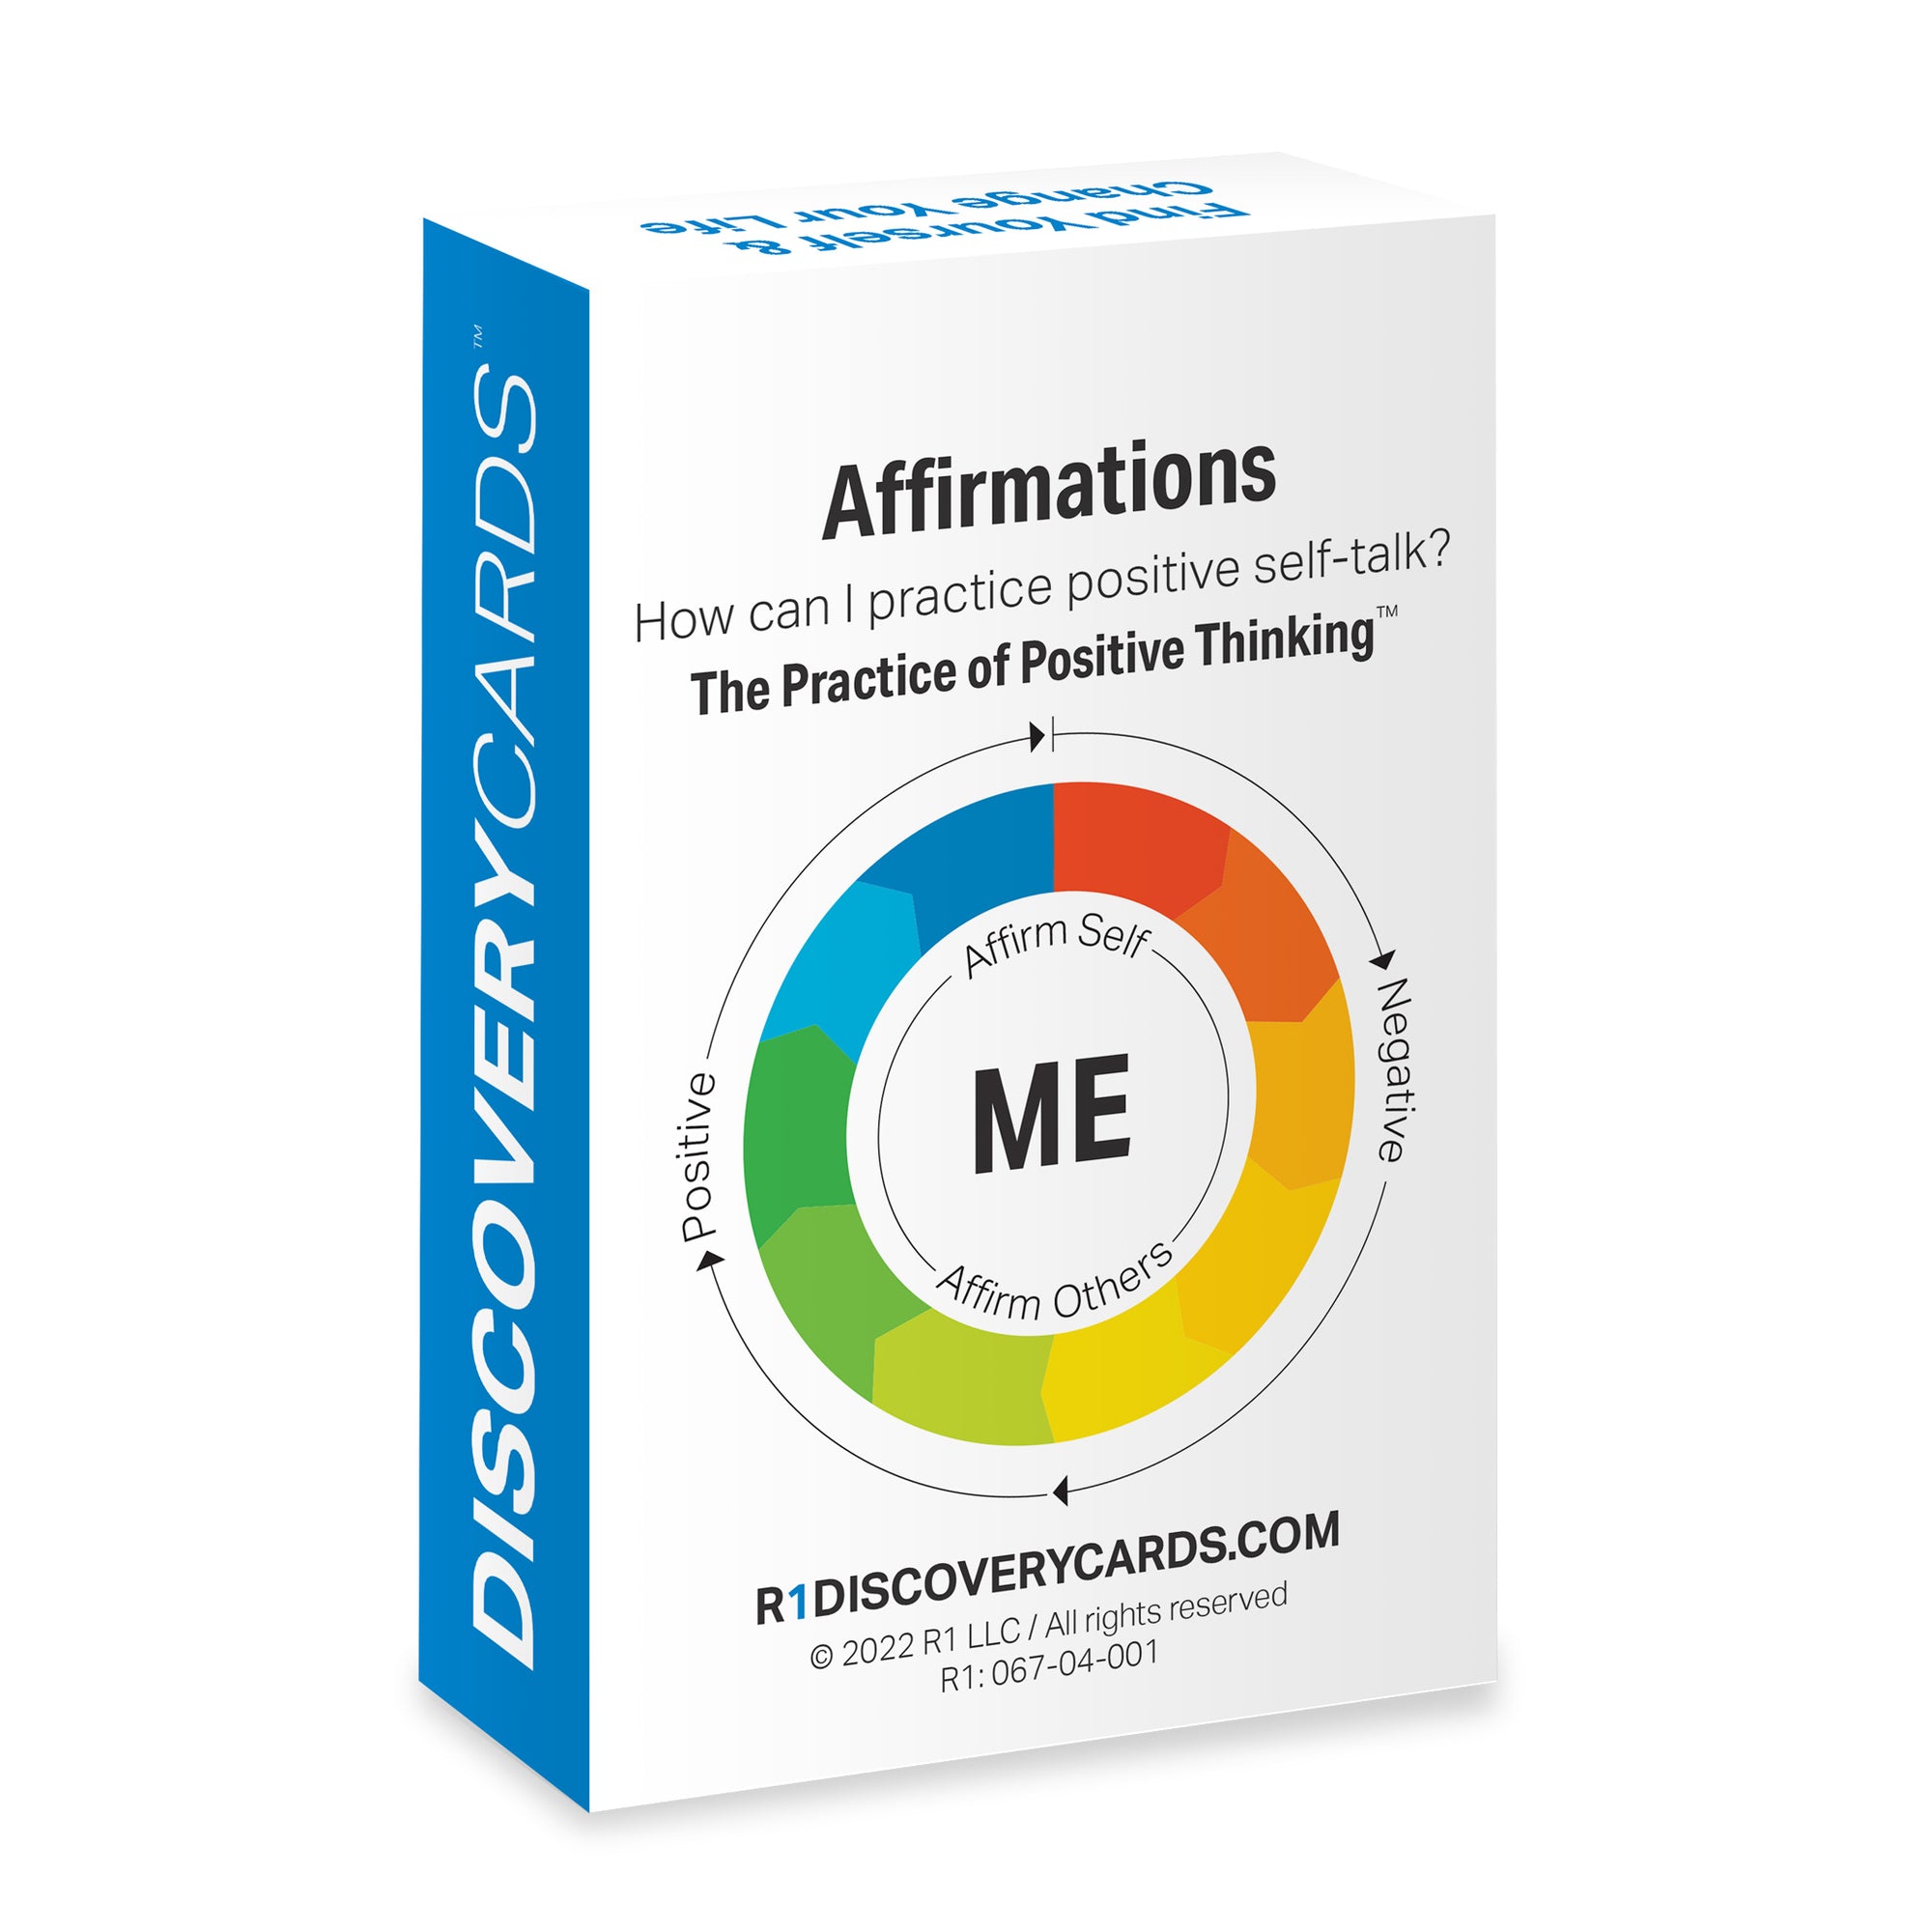 Affirmations Discovery Cards Deck